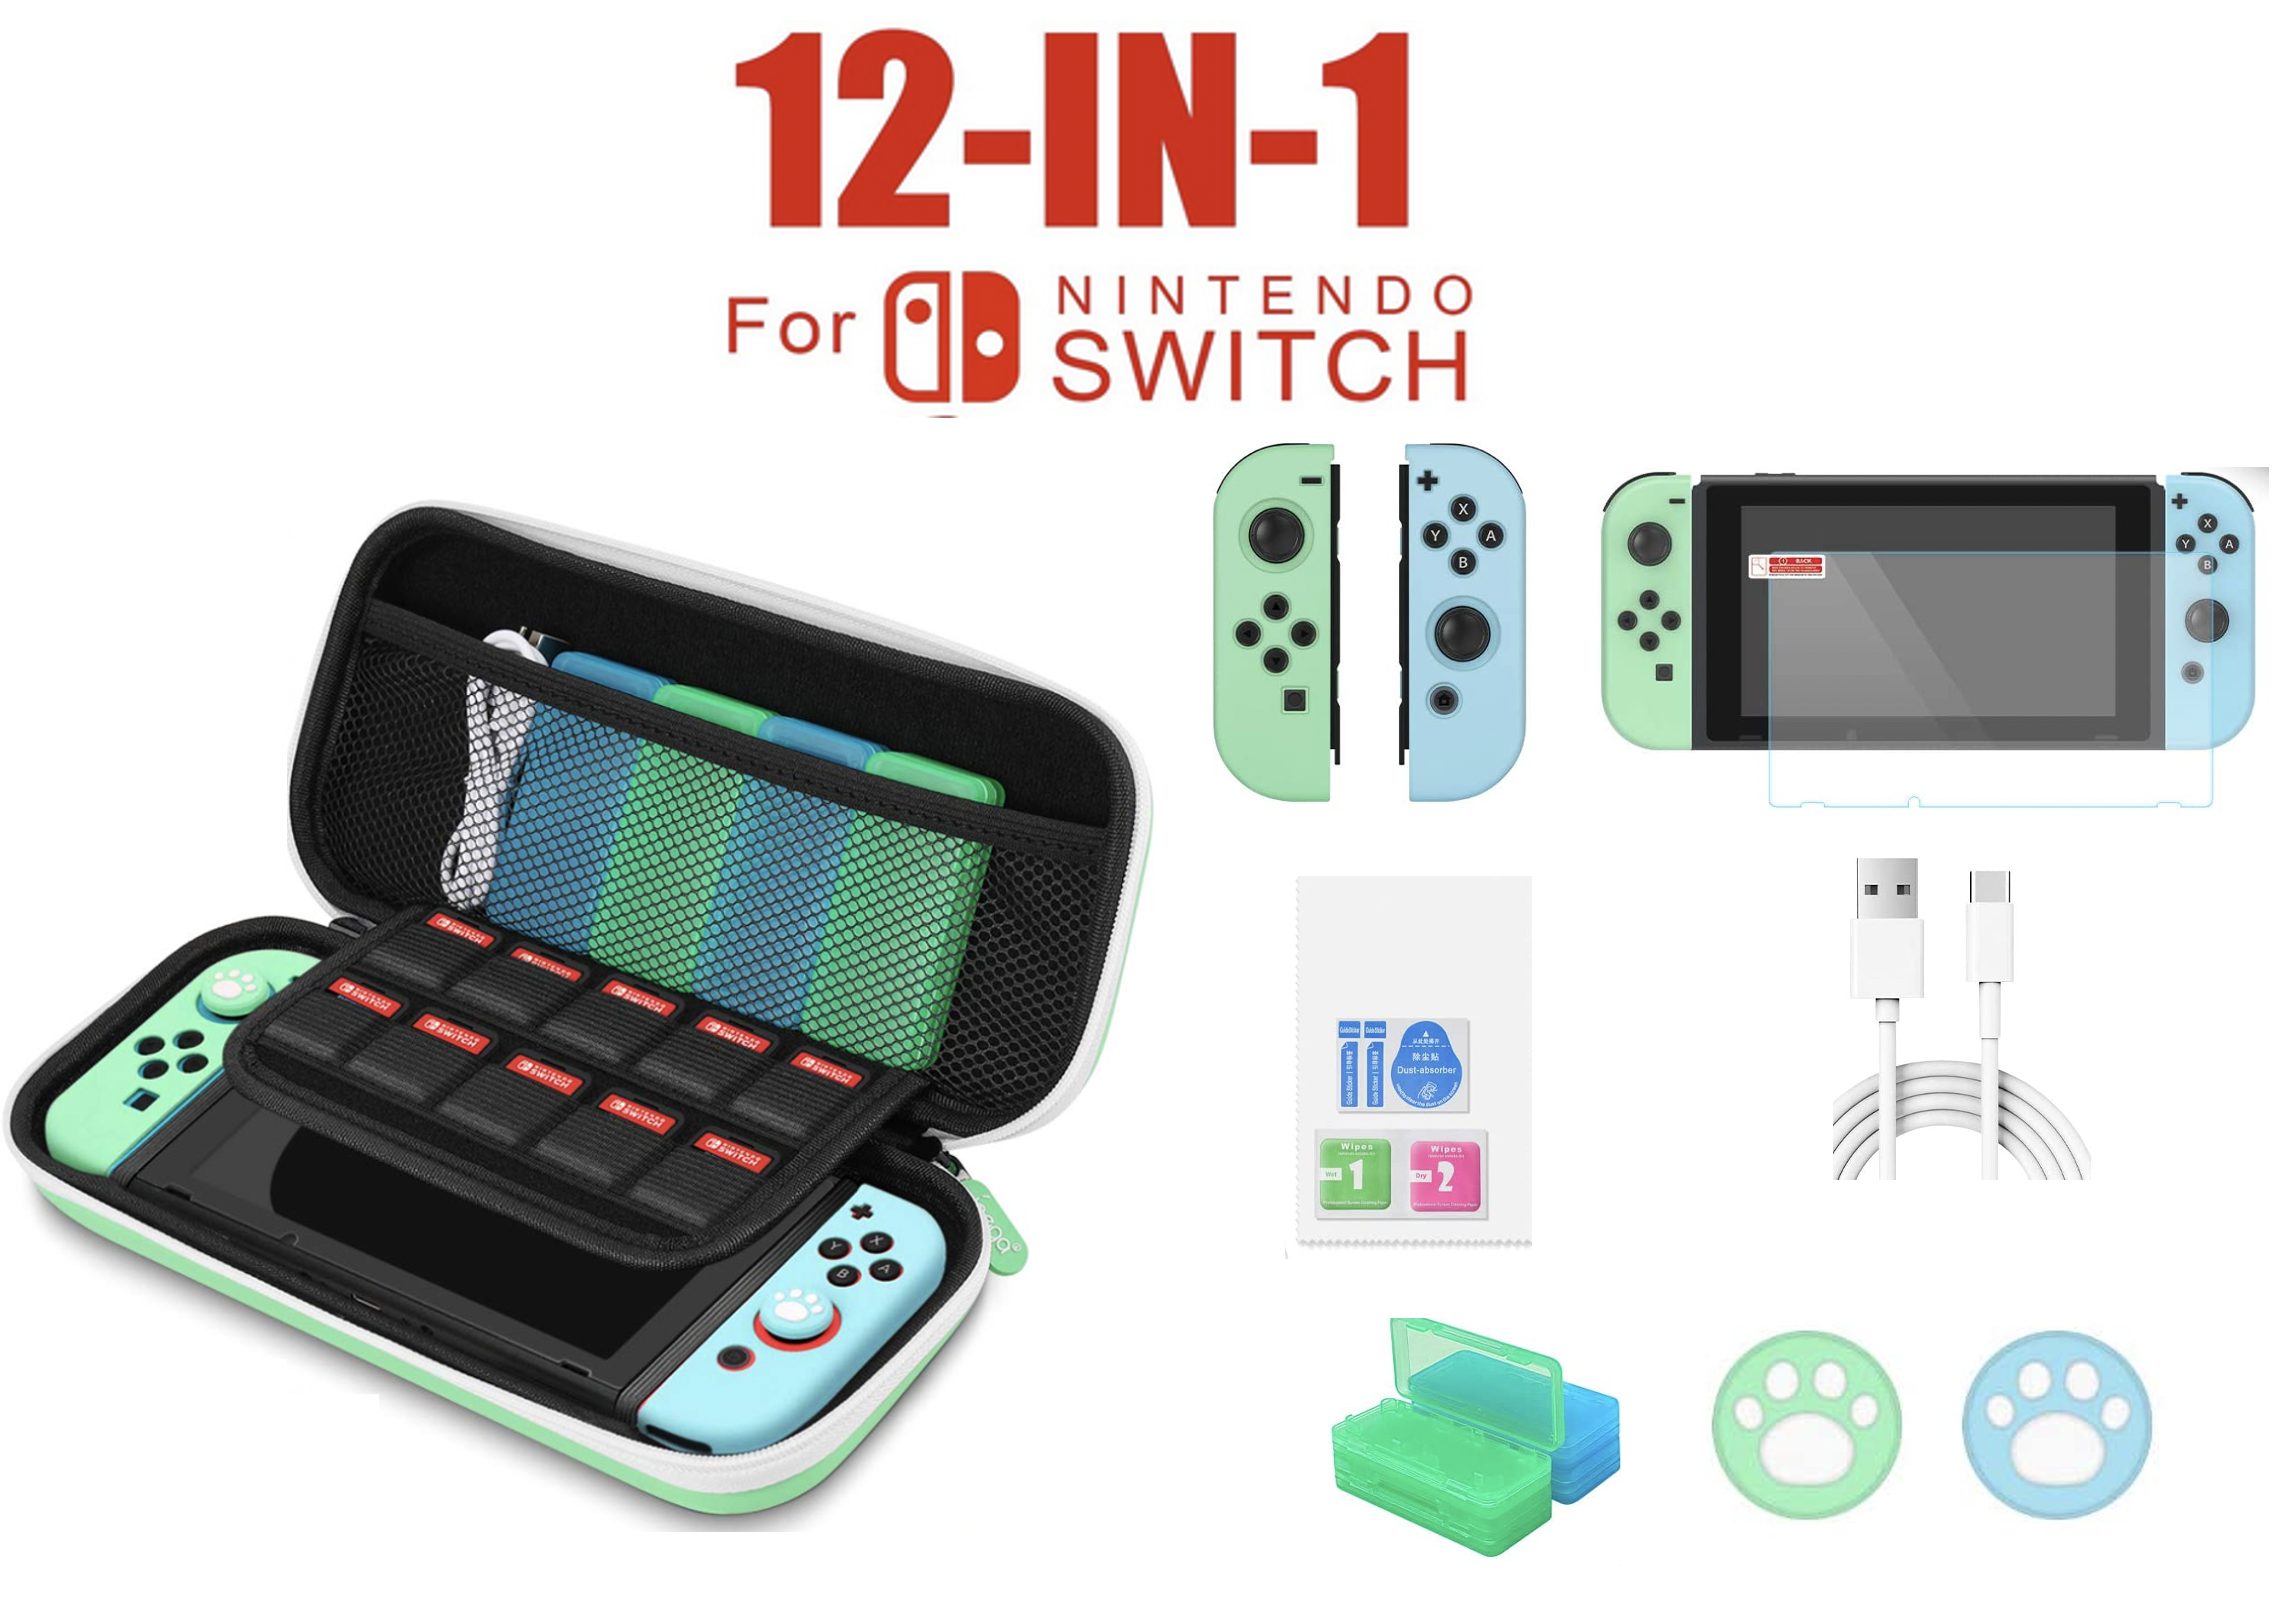 2022 Nintendo Switch Console with Mario Kart 8 Deluxe - Neon Red/Blue Joy-Con, 6.2" Touchscreen LCD Display, Marxsol 12-in-1 Accessories - image 3 of 9